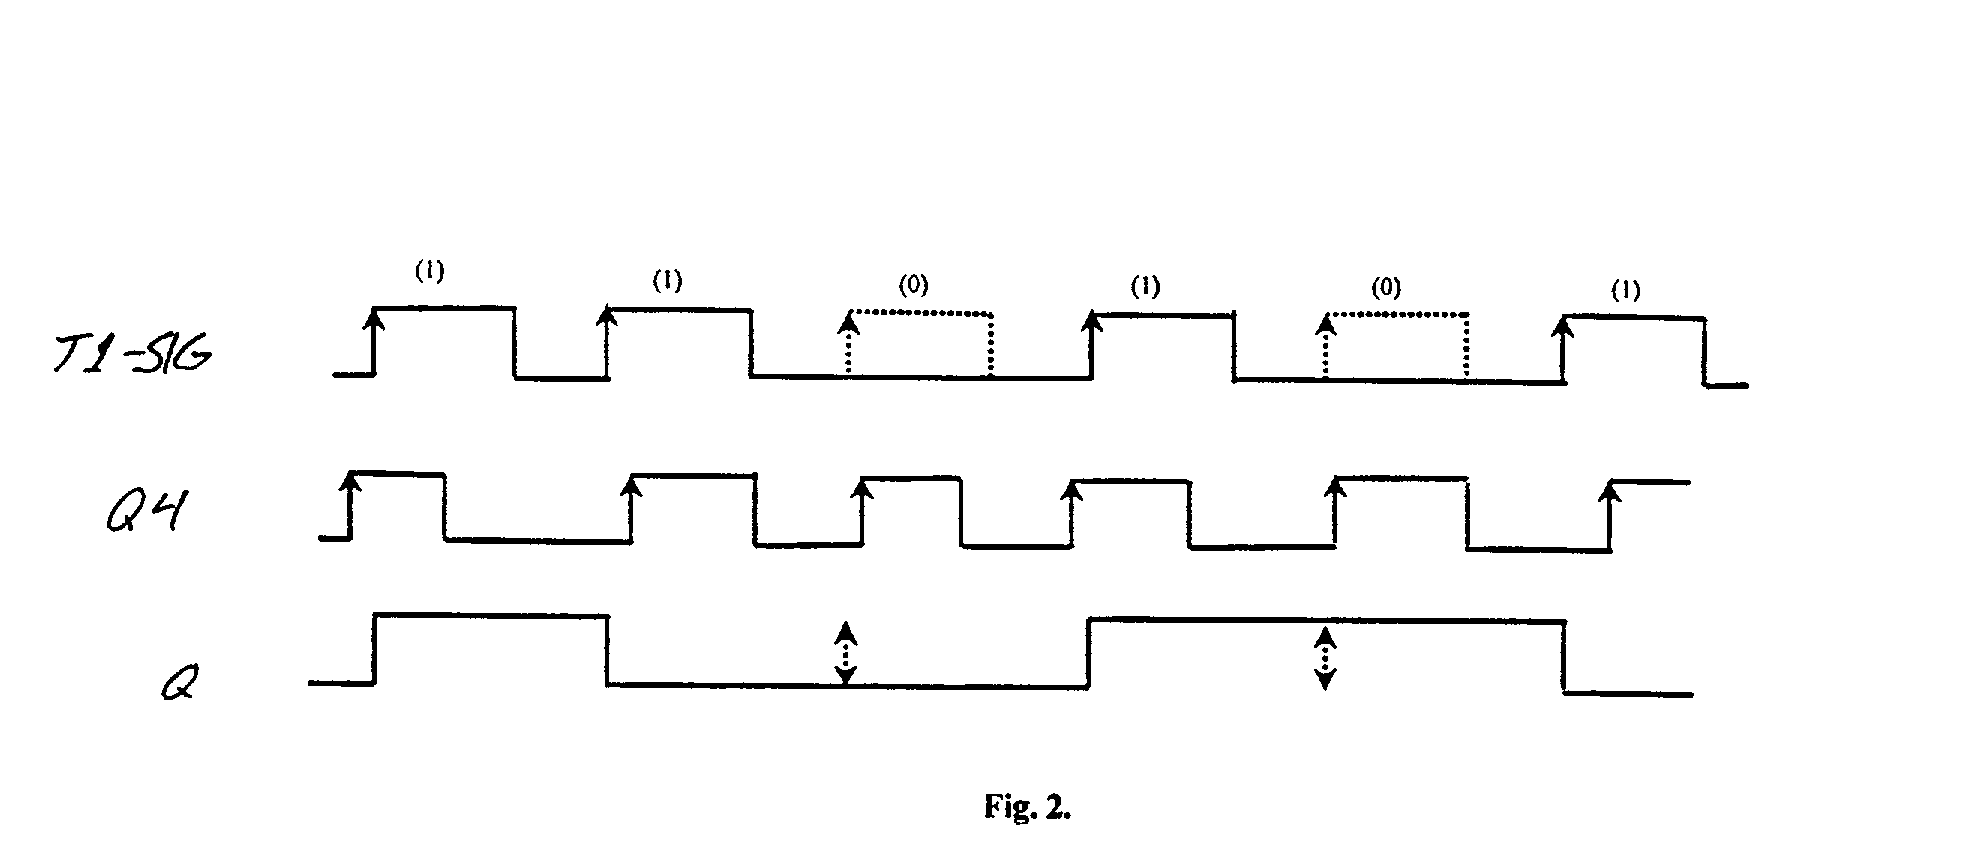 Clock recovery and detection of rapid phase transients